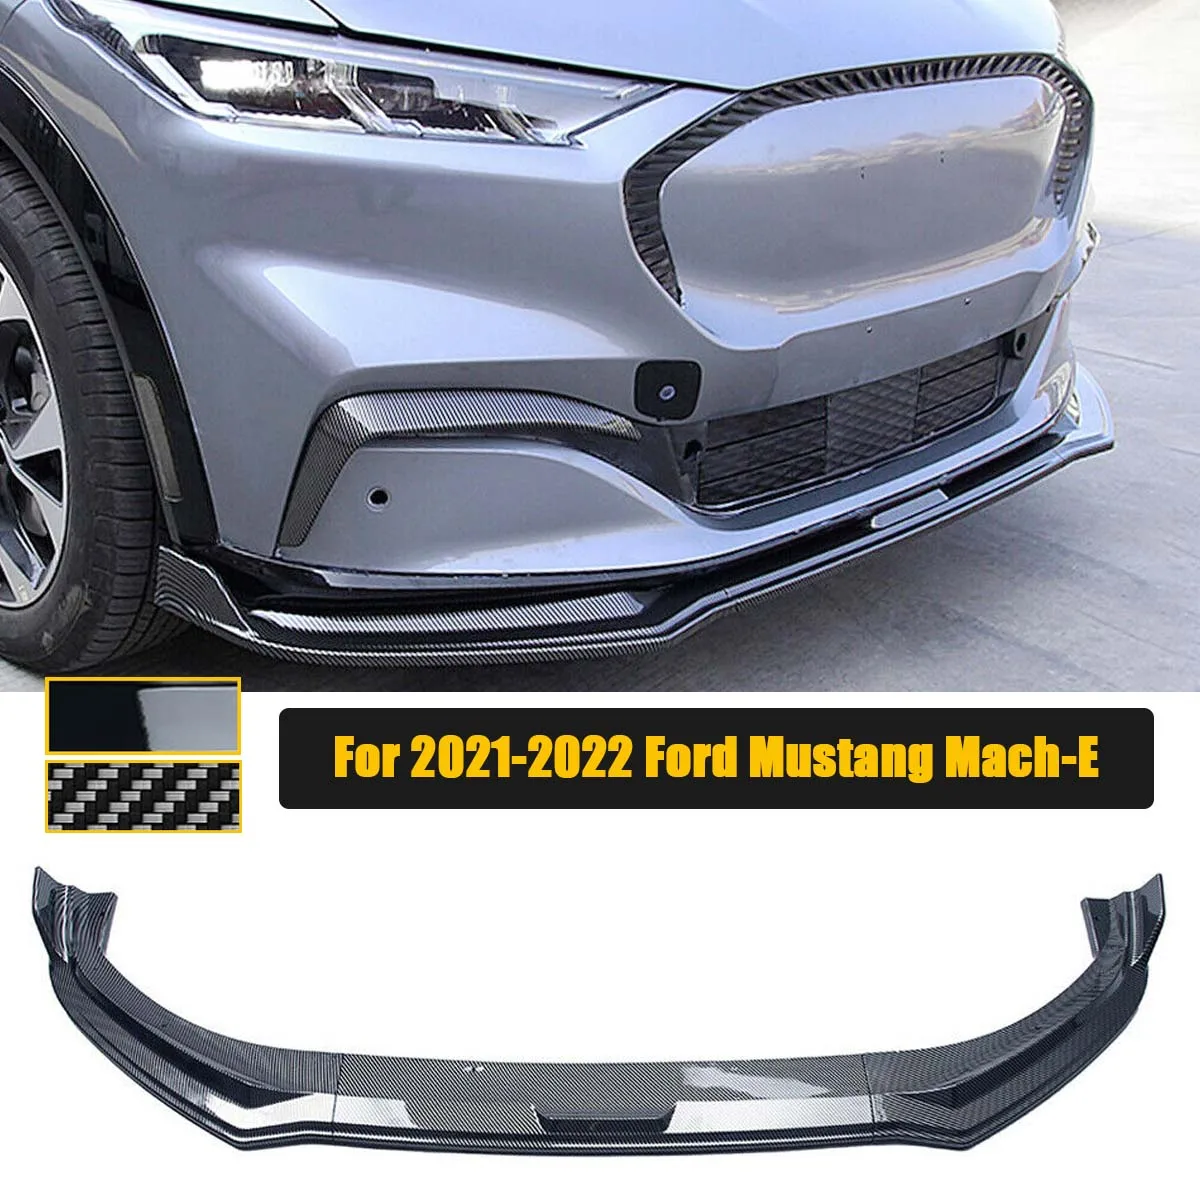 Front Bumper Lip Spoiler For 2021 2022 Ford Mustang Mach-E Side Splitters Body Kit Deflector Guards Cover Car Accessories